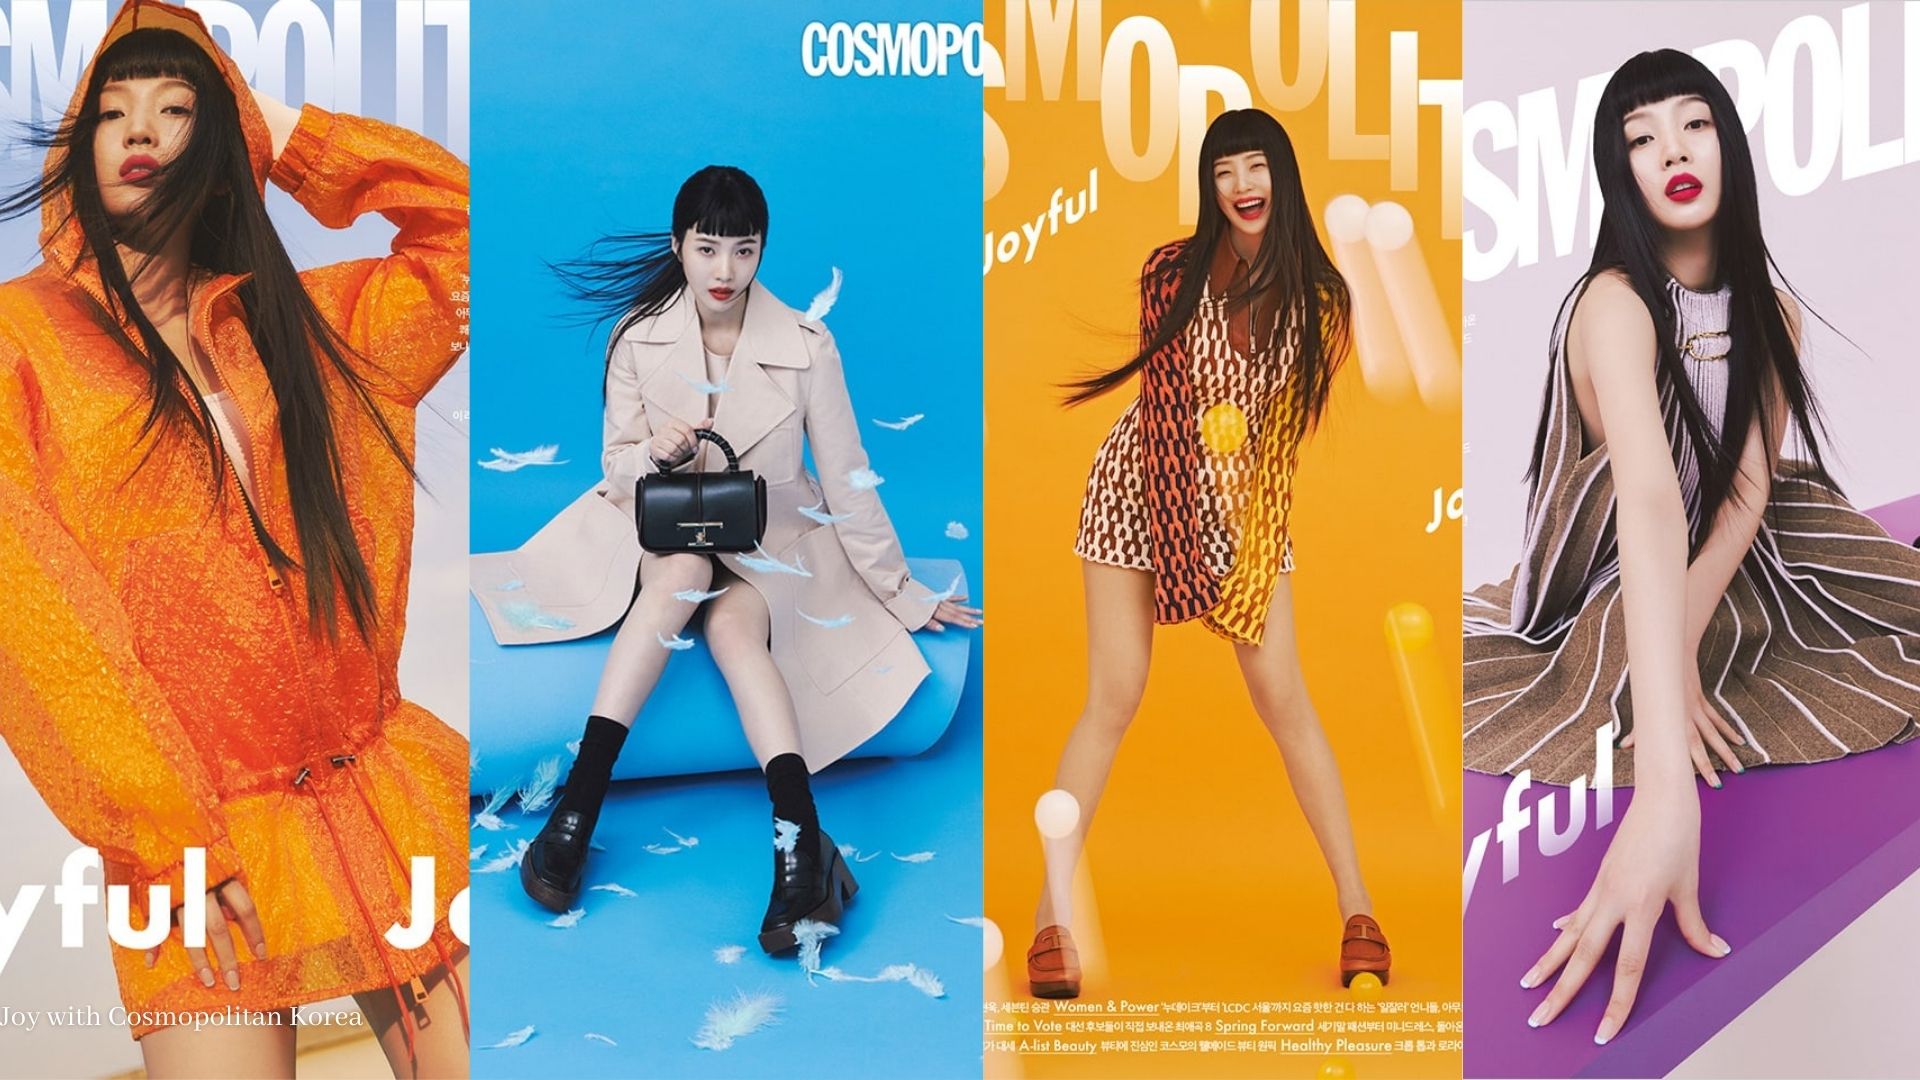 Red Velvet’s Joy Interview with Cosmopolitan – Talks About Her Solo Album & More